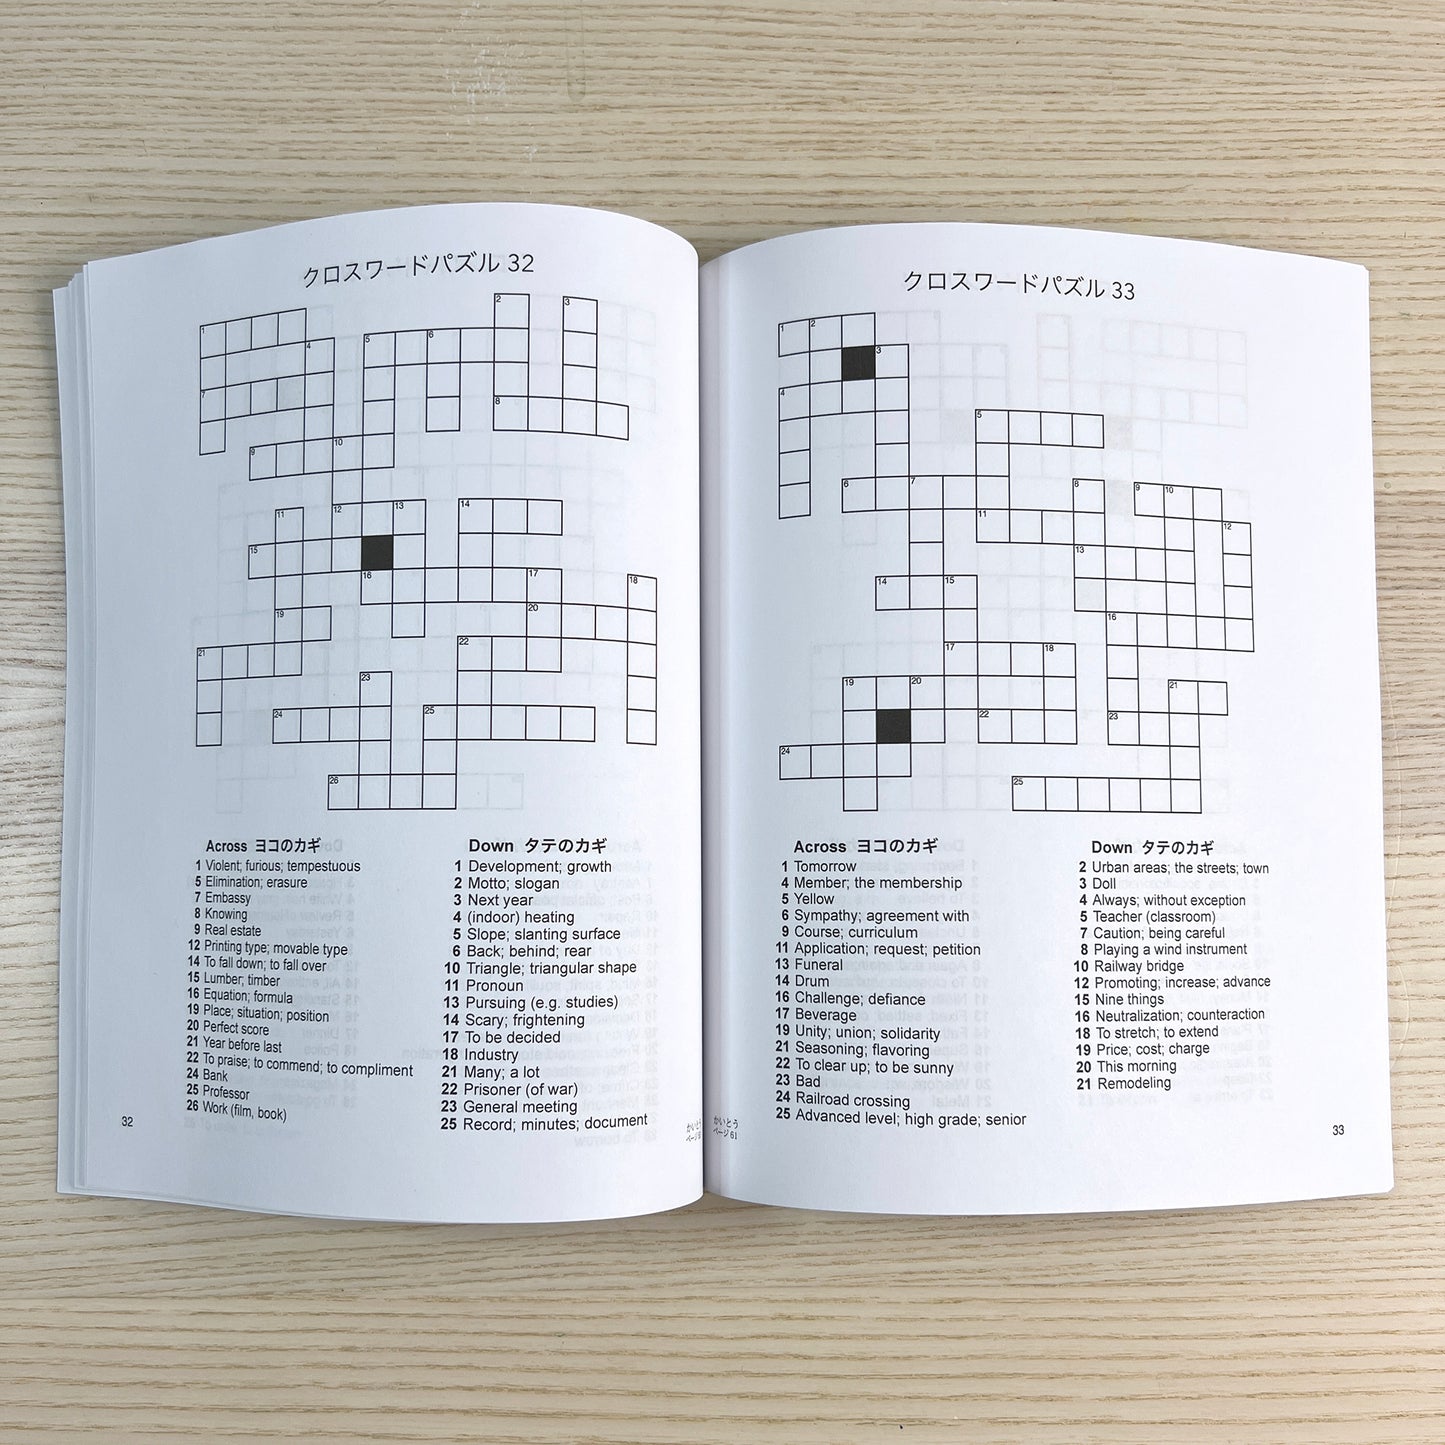 Japanese Crossword Puzzles: Learn 1,500+ Japanese Words Solving Over 50 Fun Puzzles